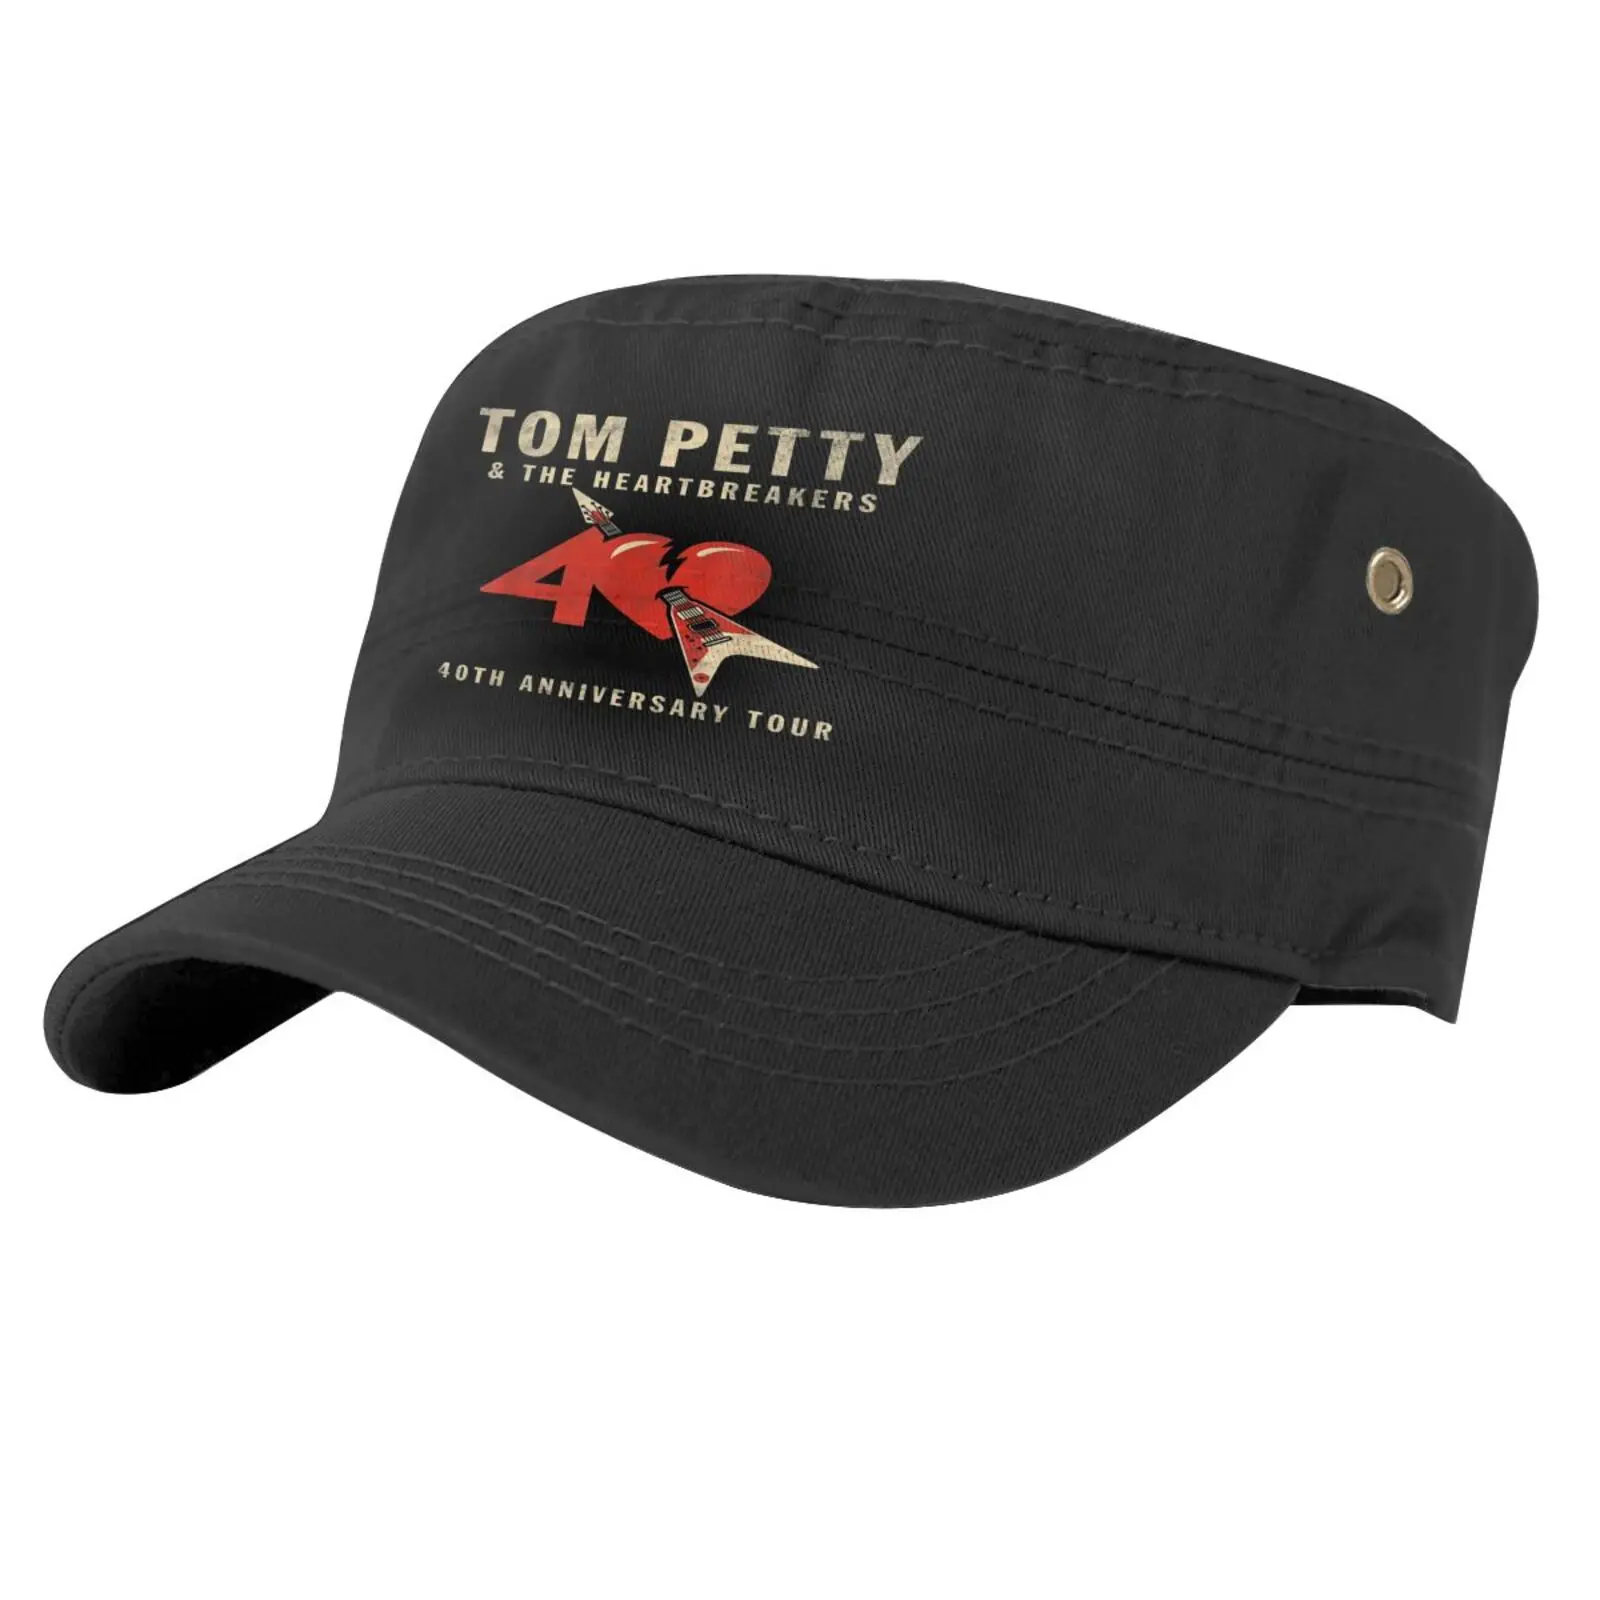 

Tom Petty Country American Fan Gifts Caps For Men Cap Male Man Hat Caps Woman Beret Adventure Time Summer Hat Sun Hats Cowgirl